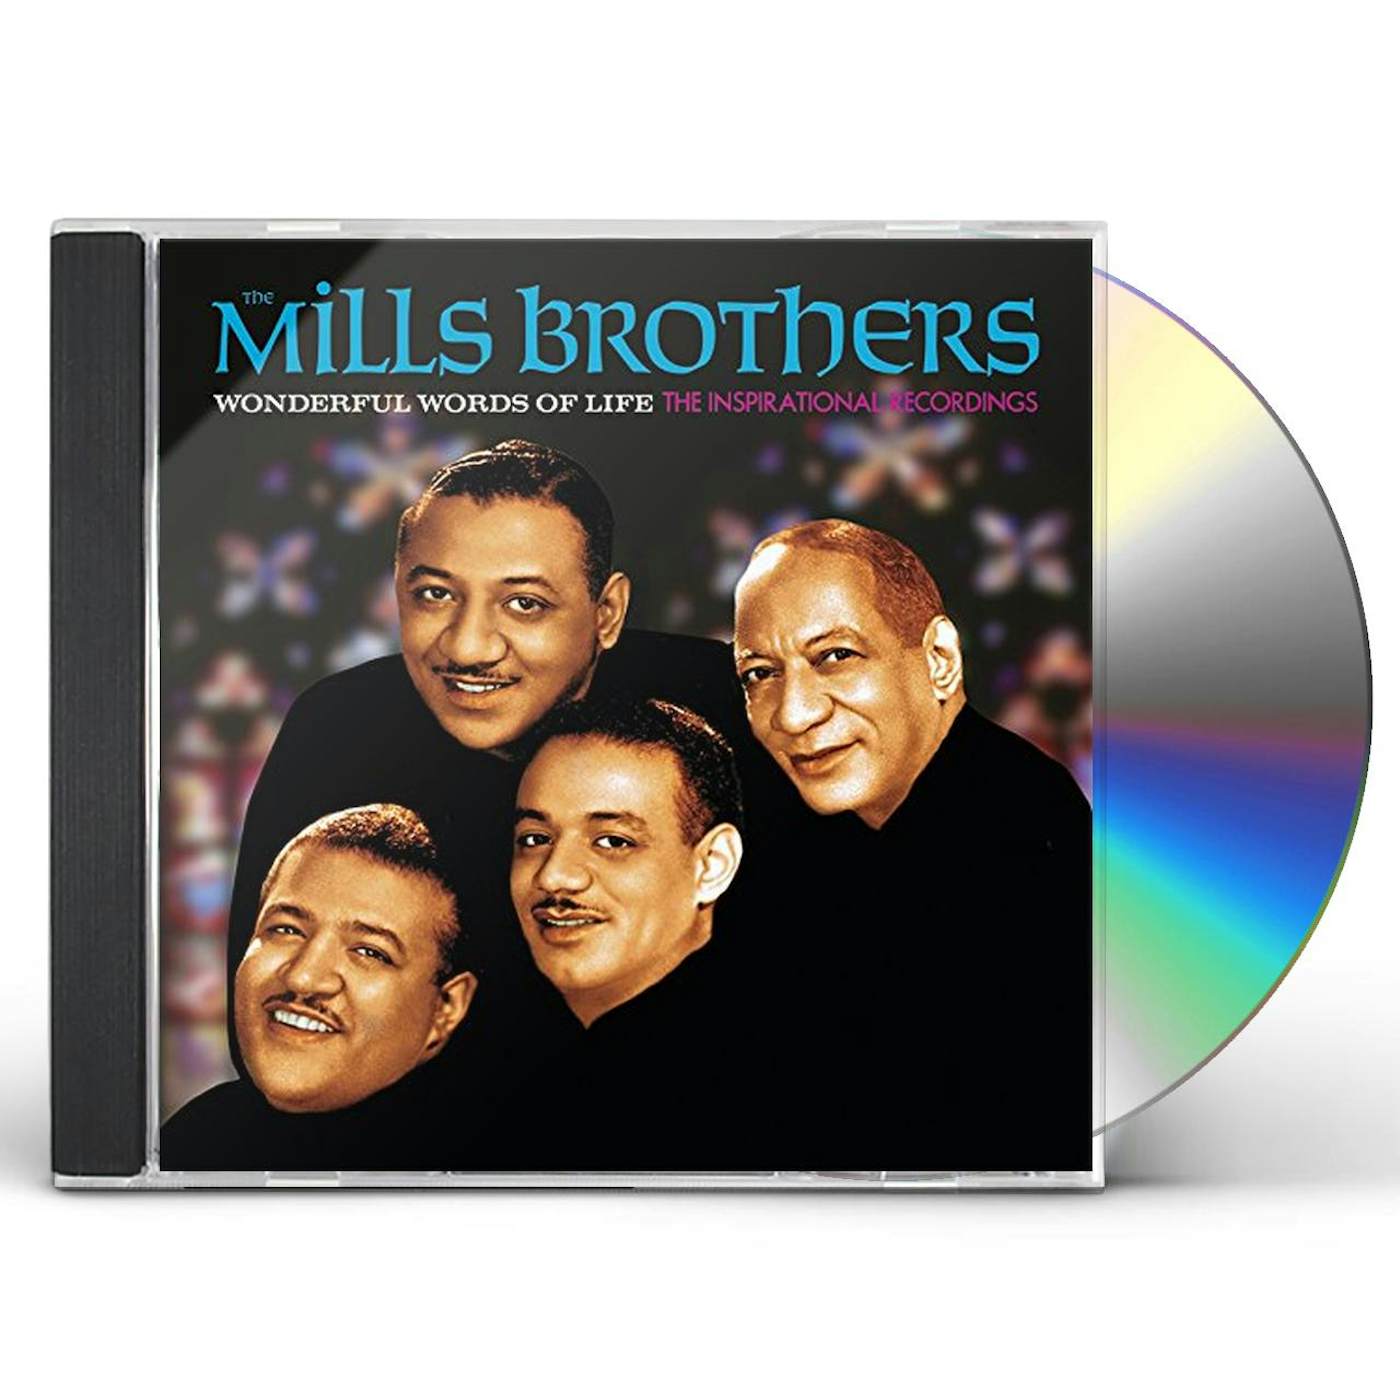 The Mills Brothers WONDERFUL WORDS OF LIFE - INSPIRATIONAL RECORDINGS CD